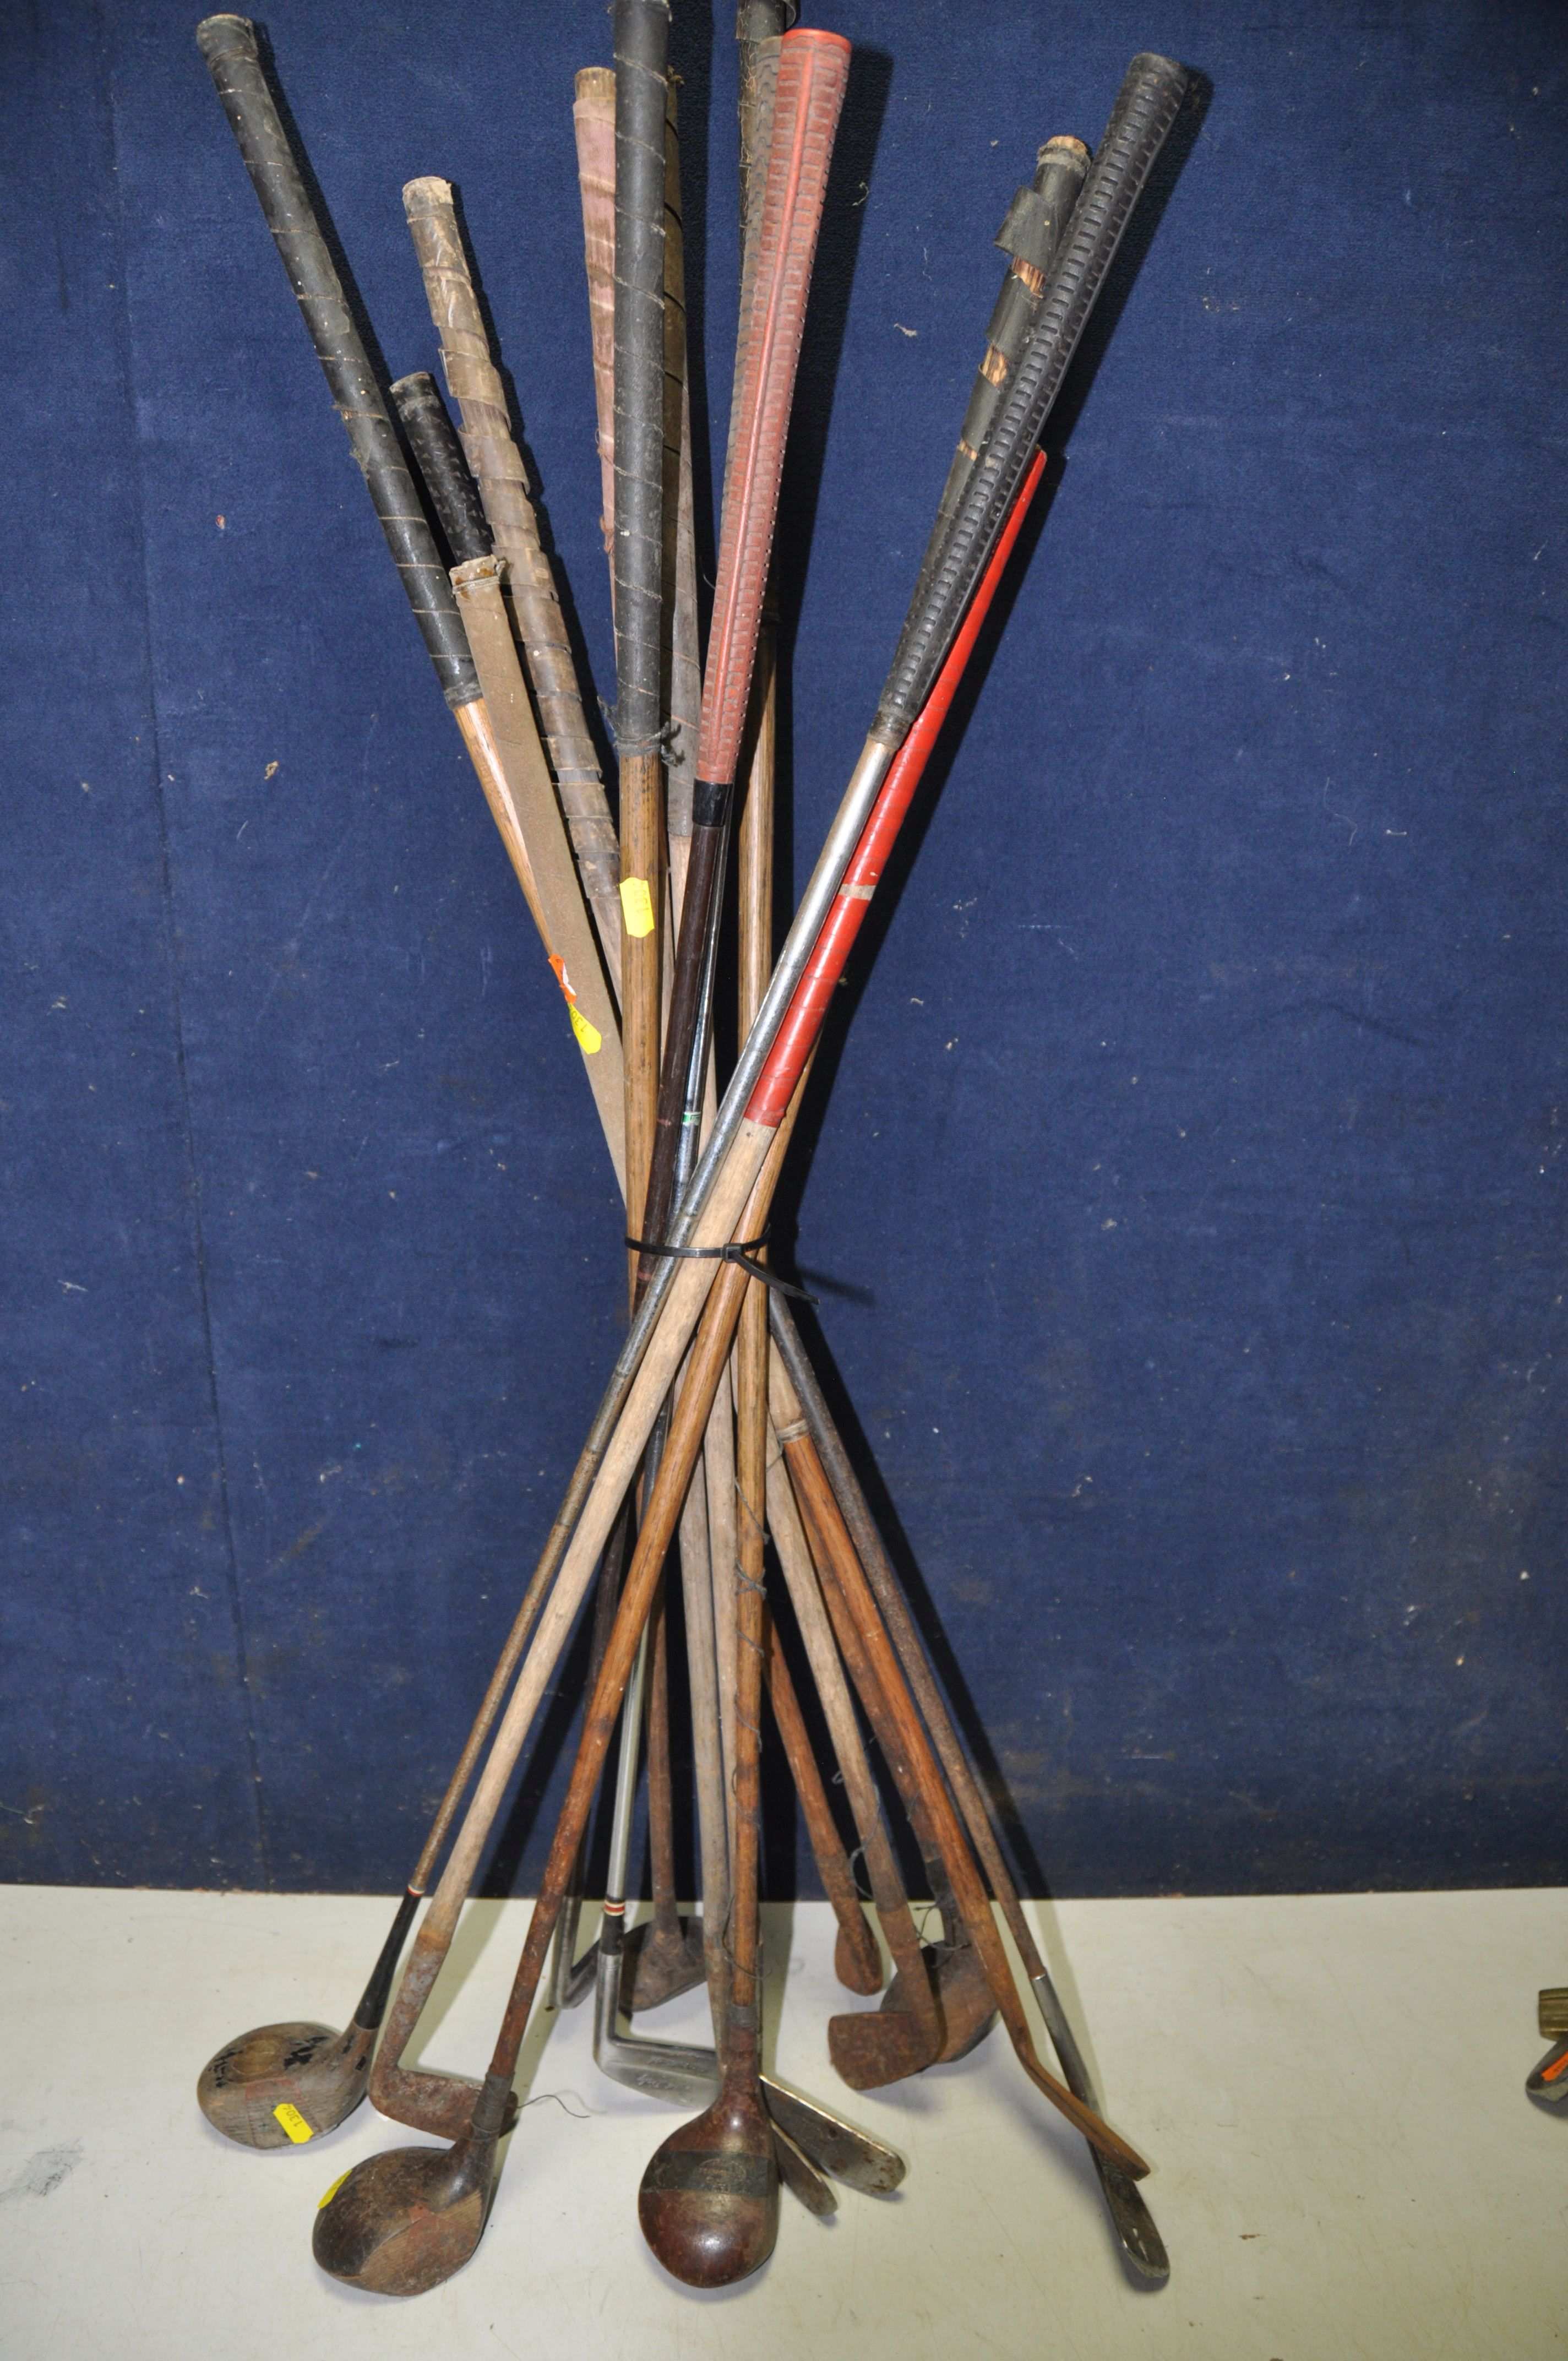 A COLLECTION OF VINTAGE AND HICKORY SHAFTED GOLF CLUBS fourteen vintage golf clubs along with four - Image 2 of 3